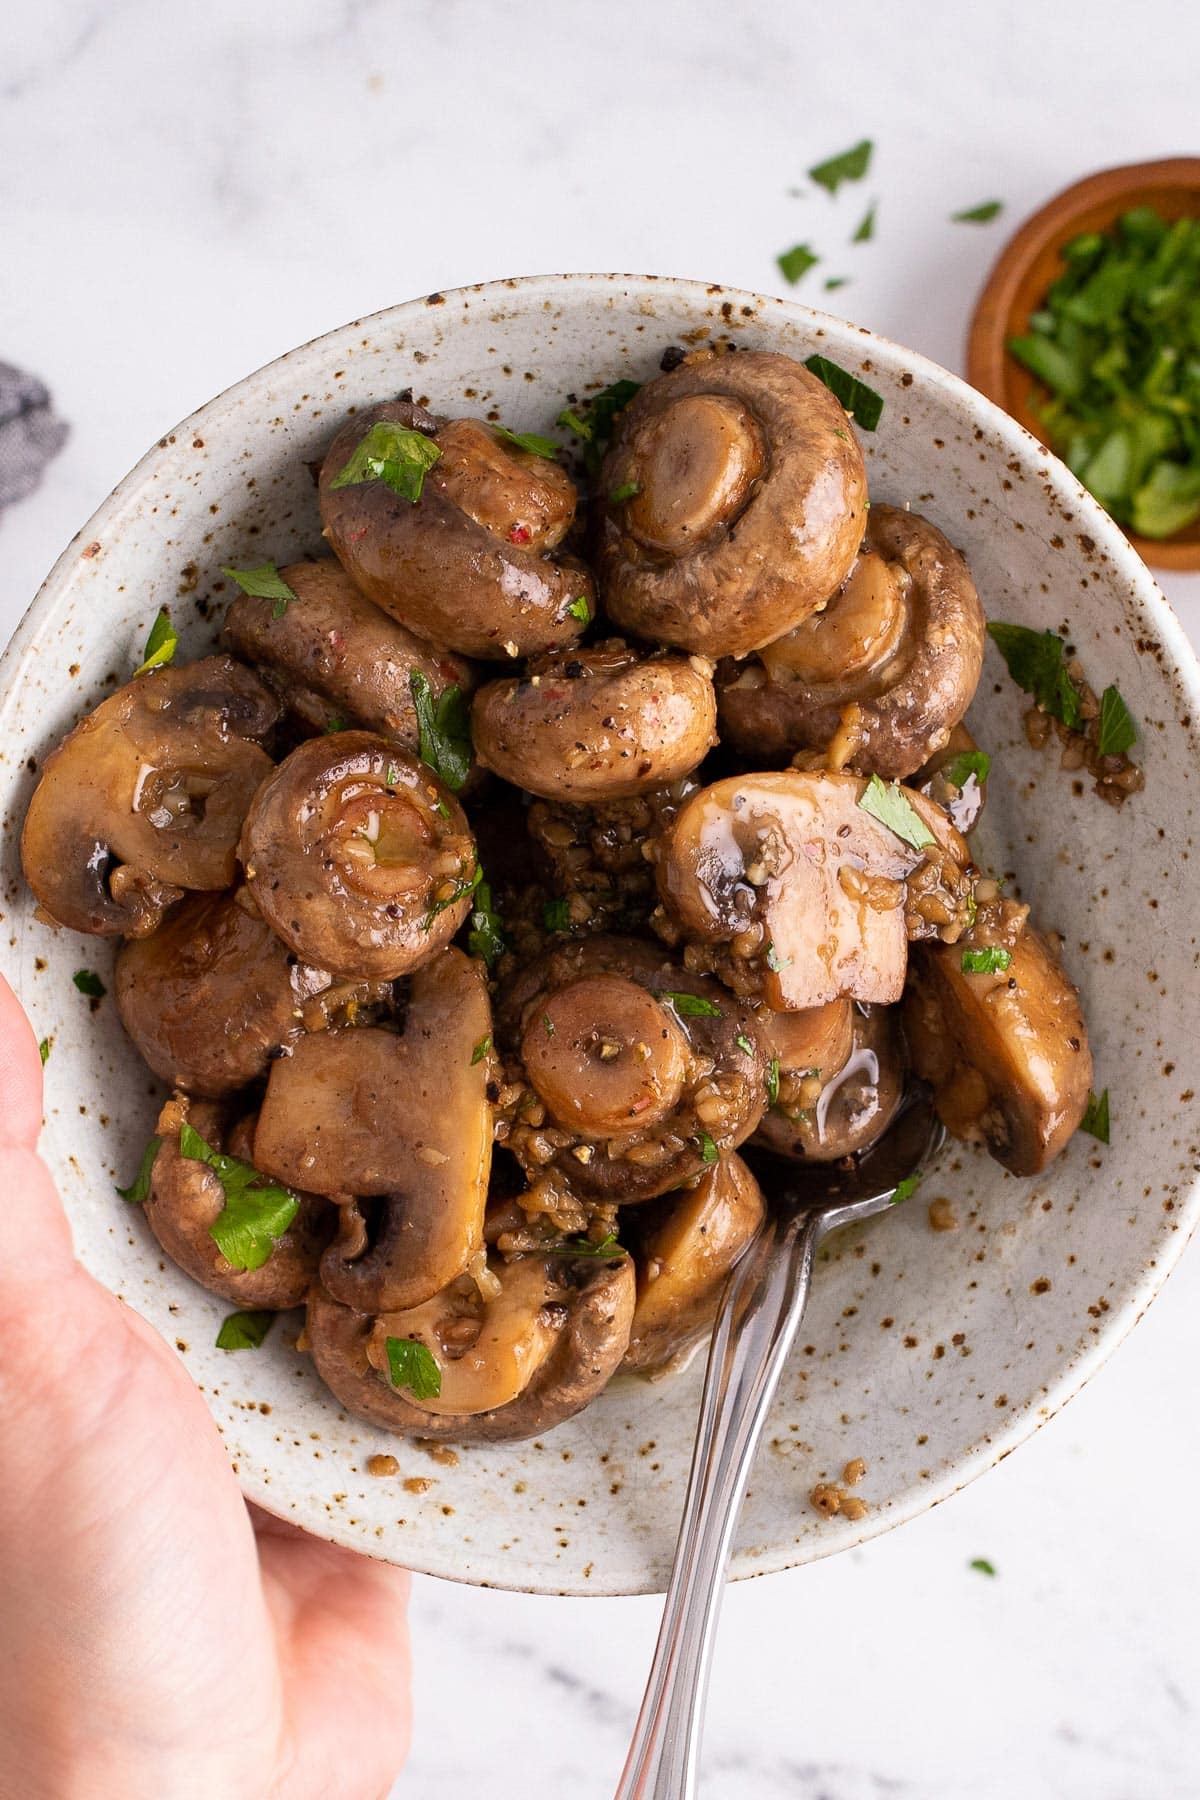 Some garlic butter mushrooms in a speckled white bowl topped with freshly chopped parsley.